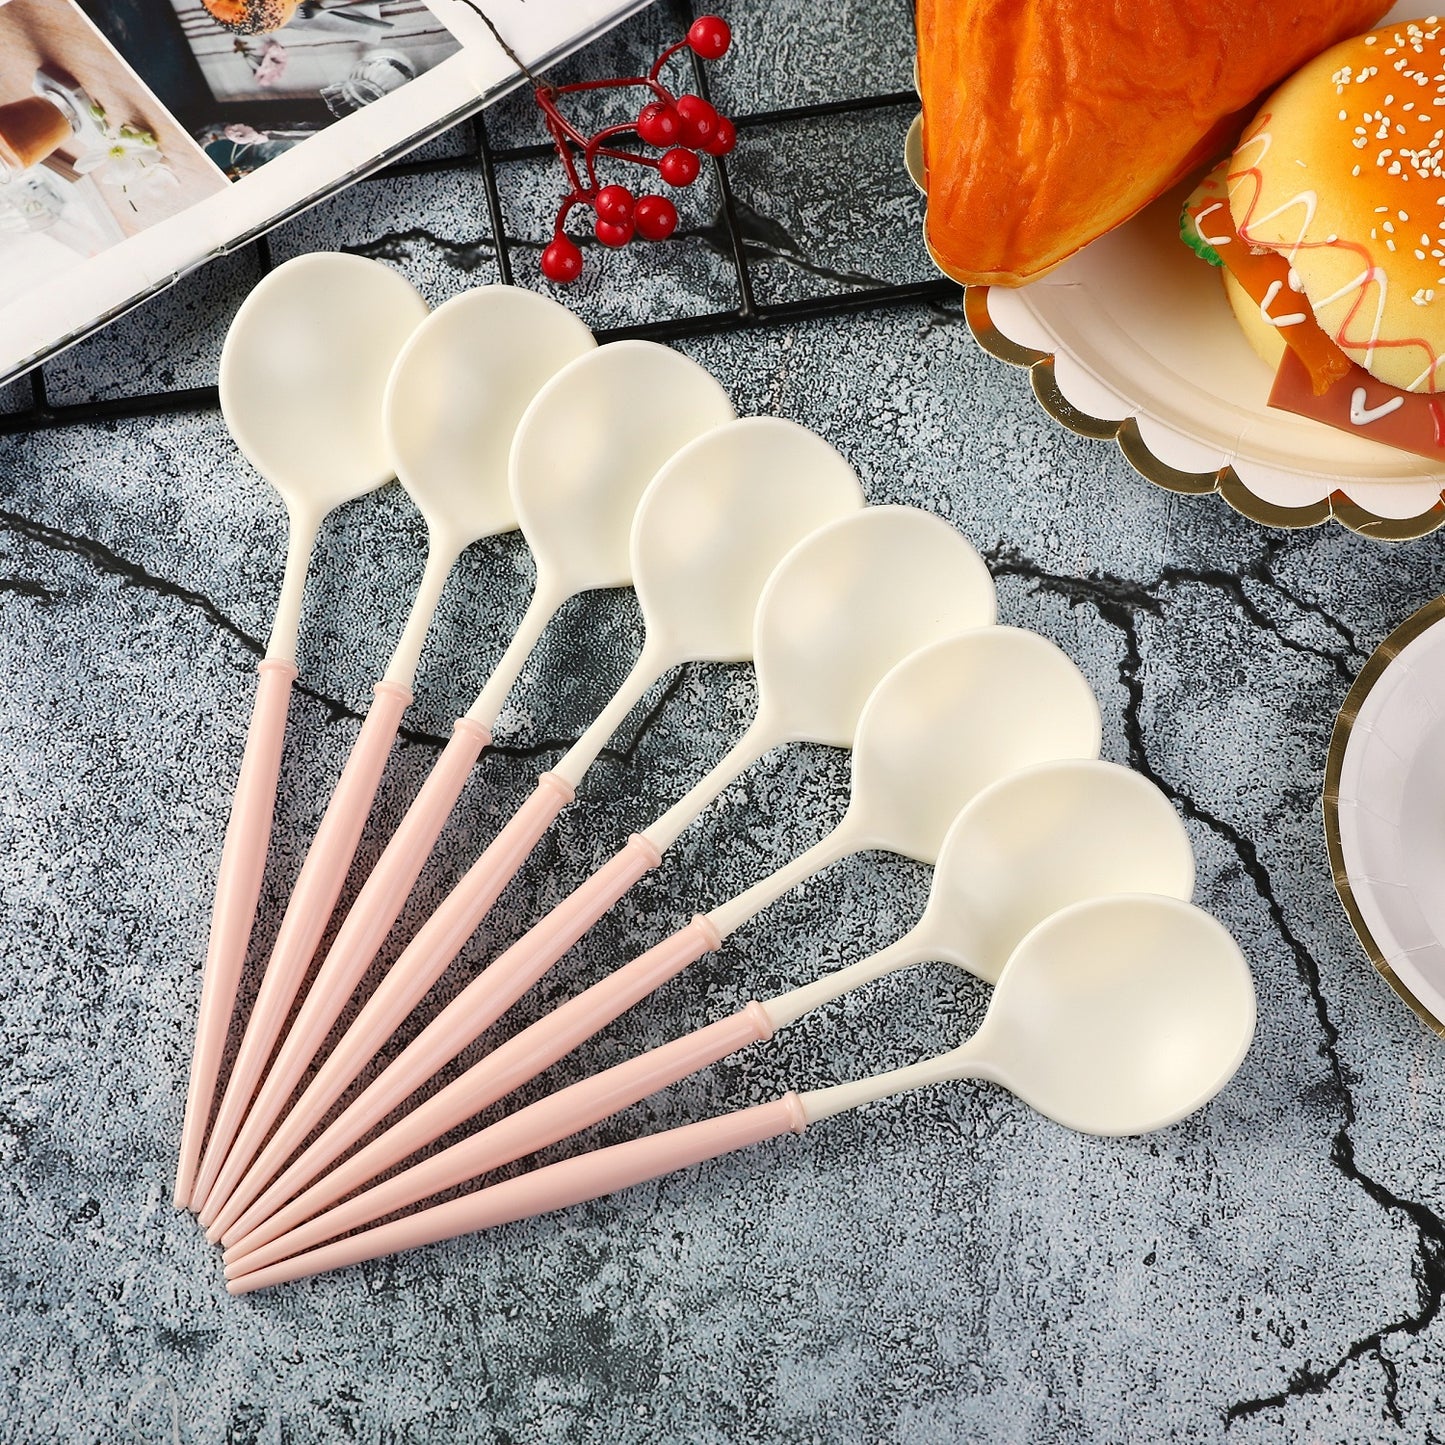 Trending 2023 Pink White Disposable Cutlery Plastic Knife Forks Spoons Tableware Party Supplies Decoration For Camping BBQ Wedding Outdoor Birthday